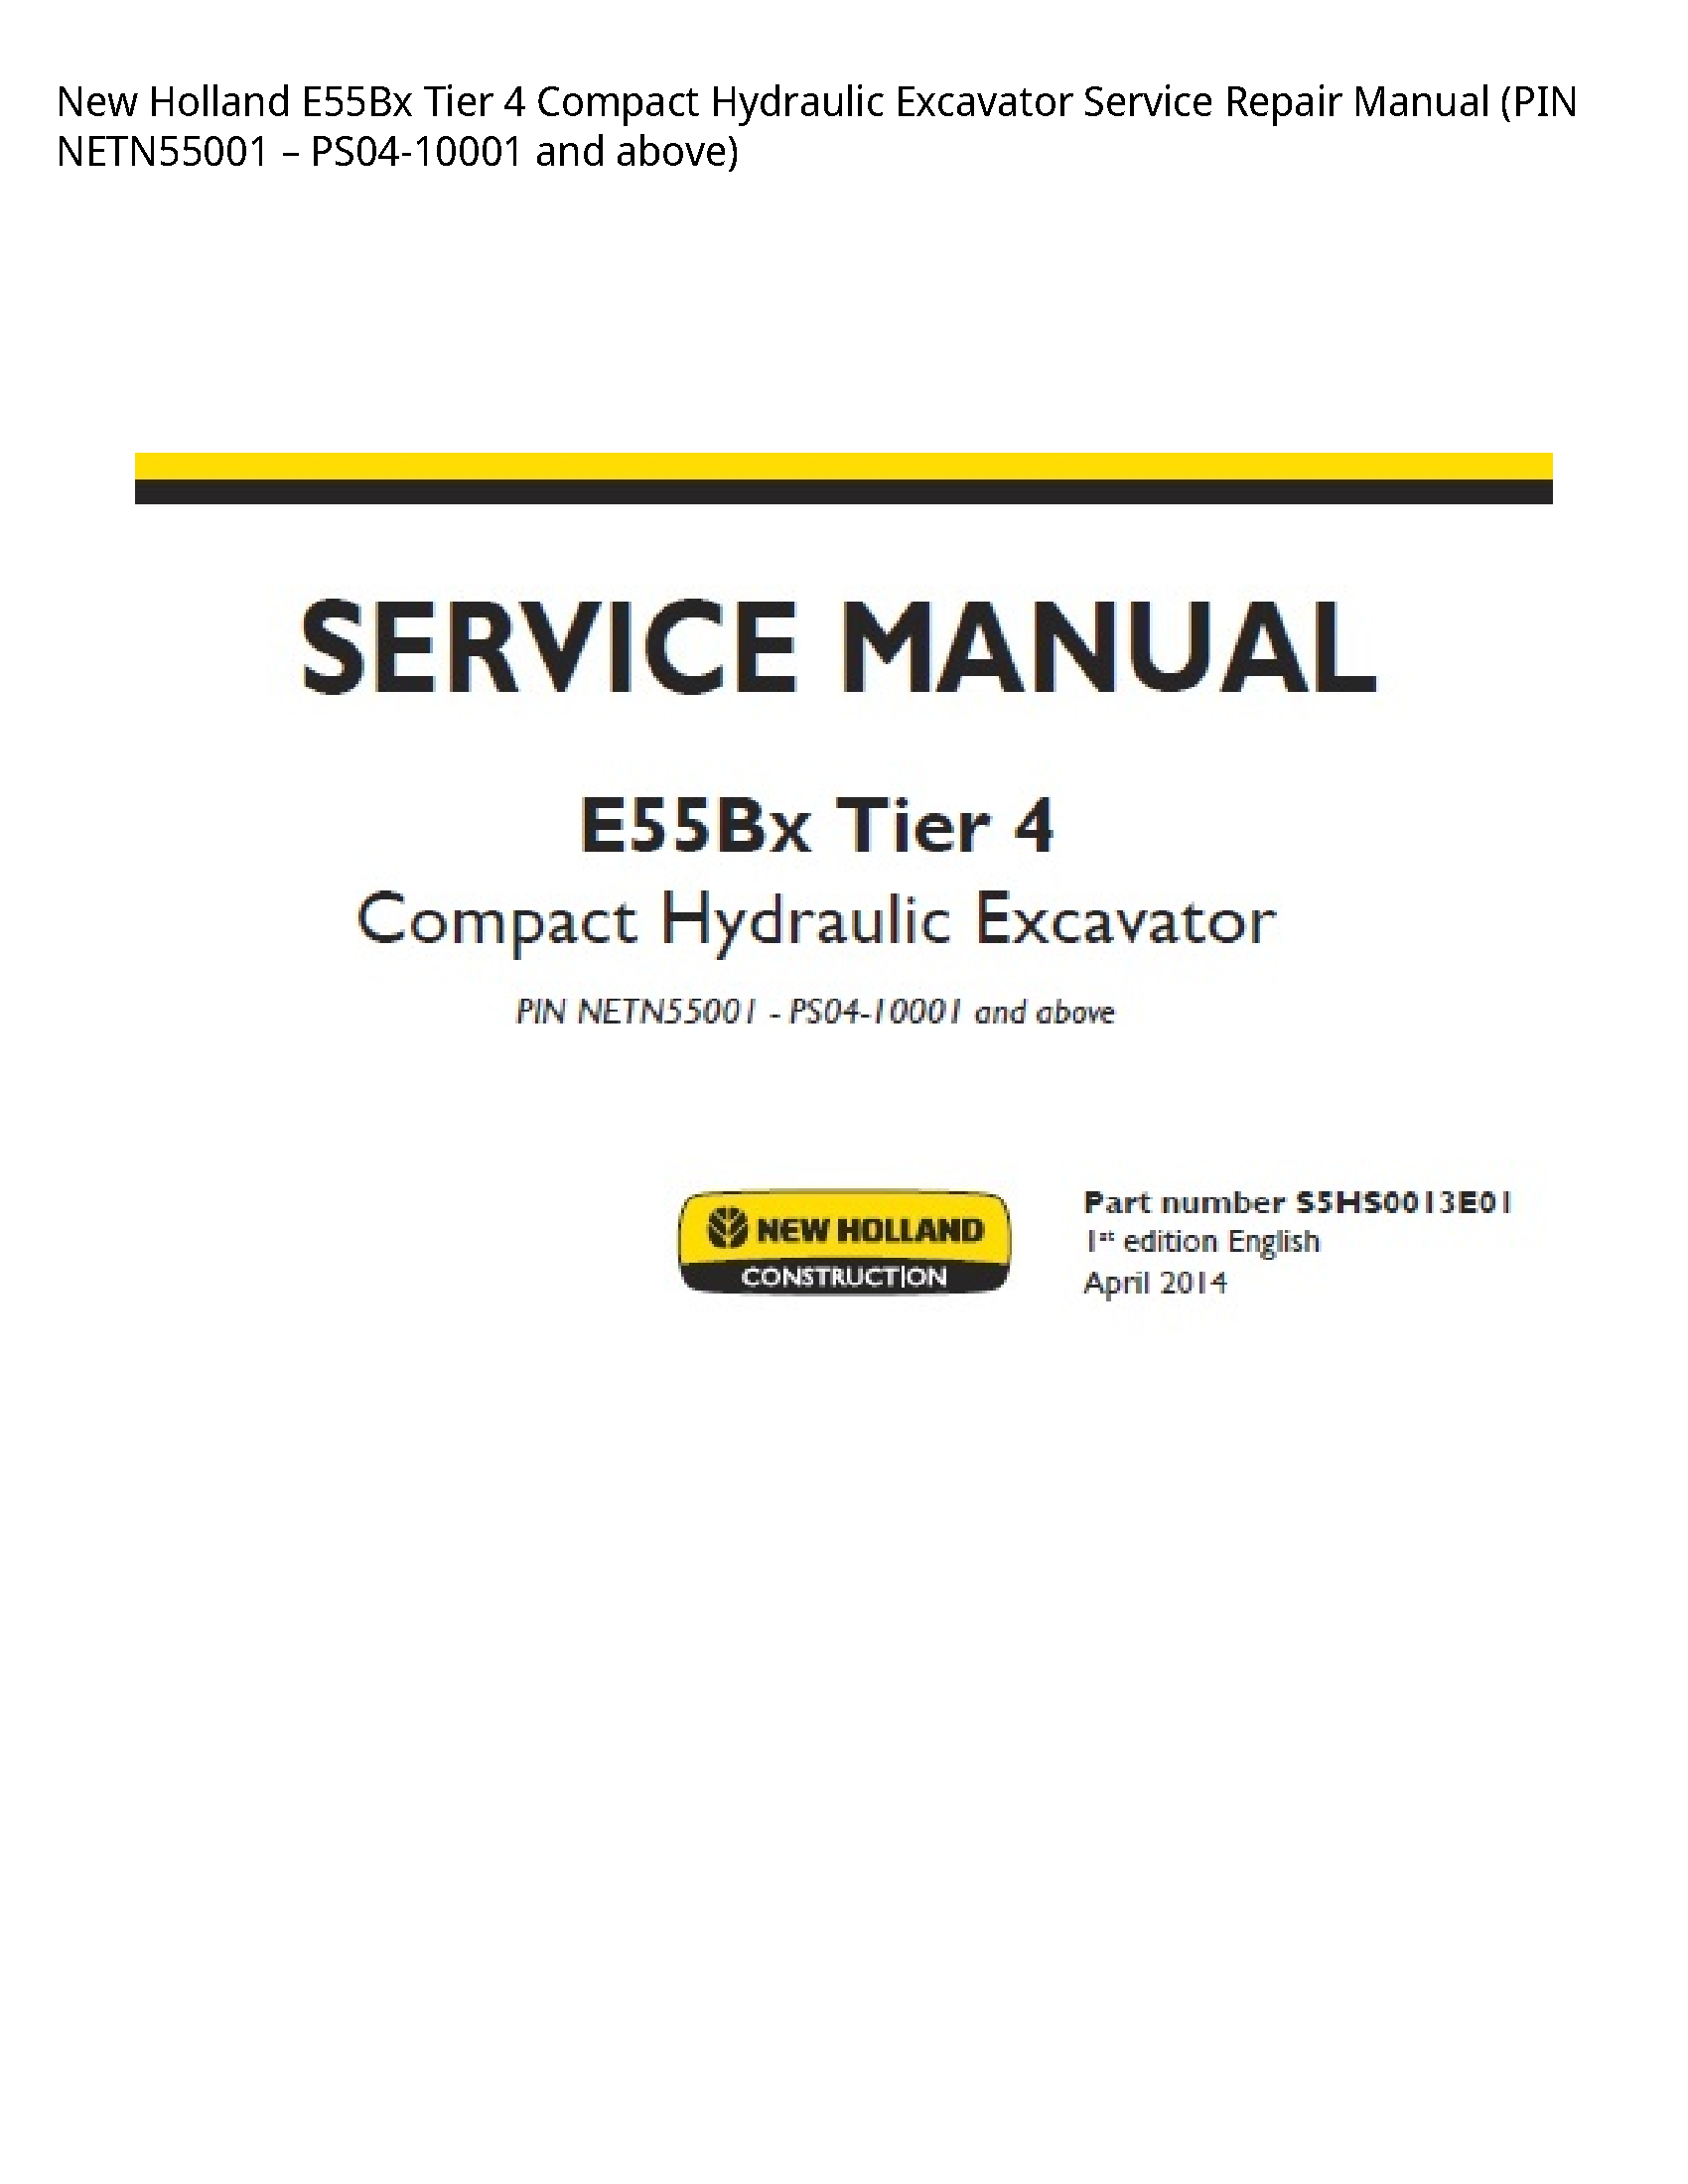 New Holland E55Bx Tier Compact Hydraulic Excavator manual